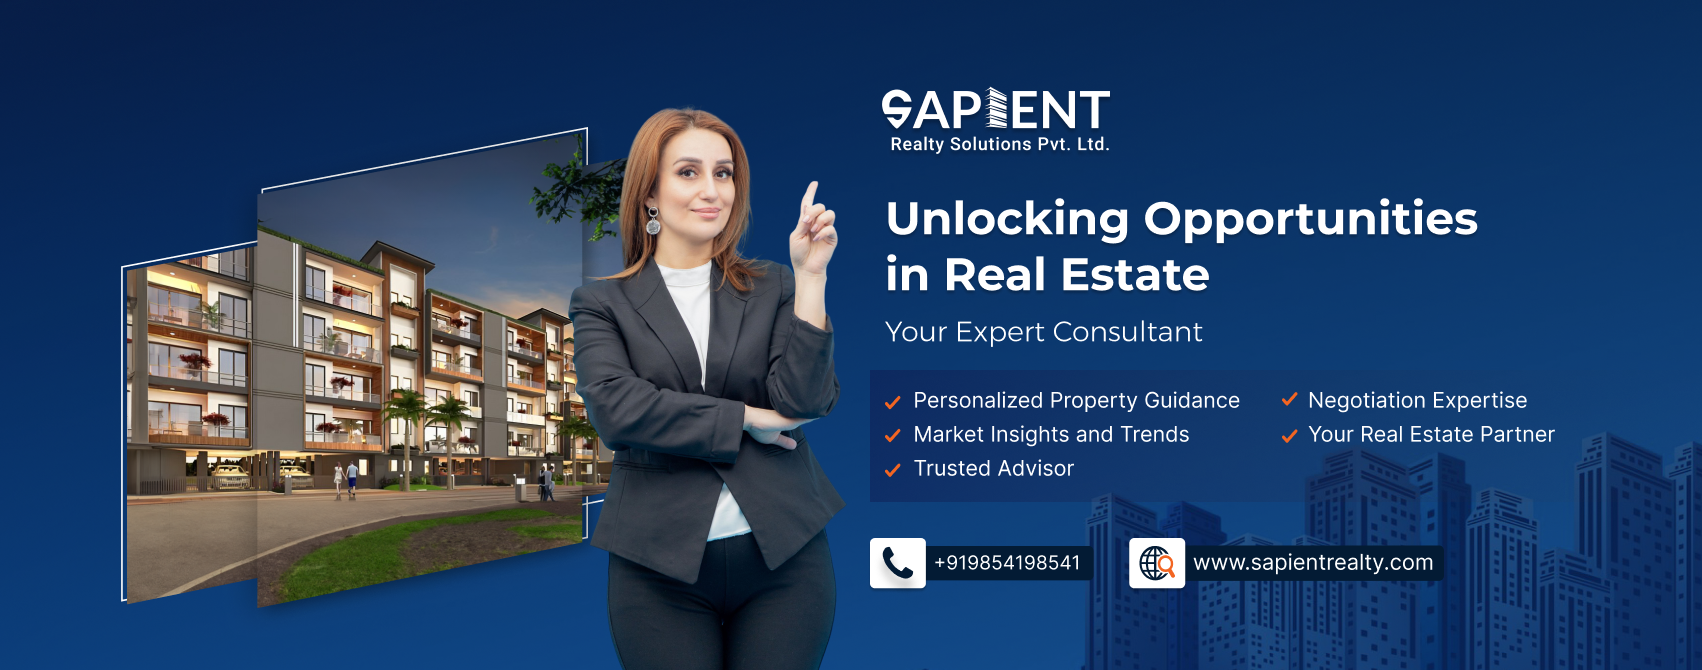 Sapient Solutions Cover Image